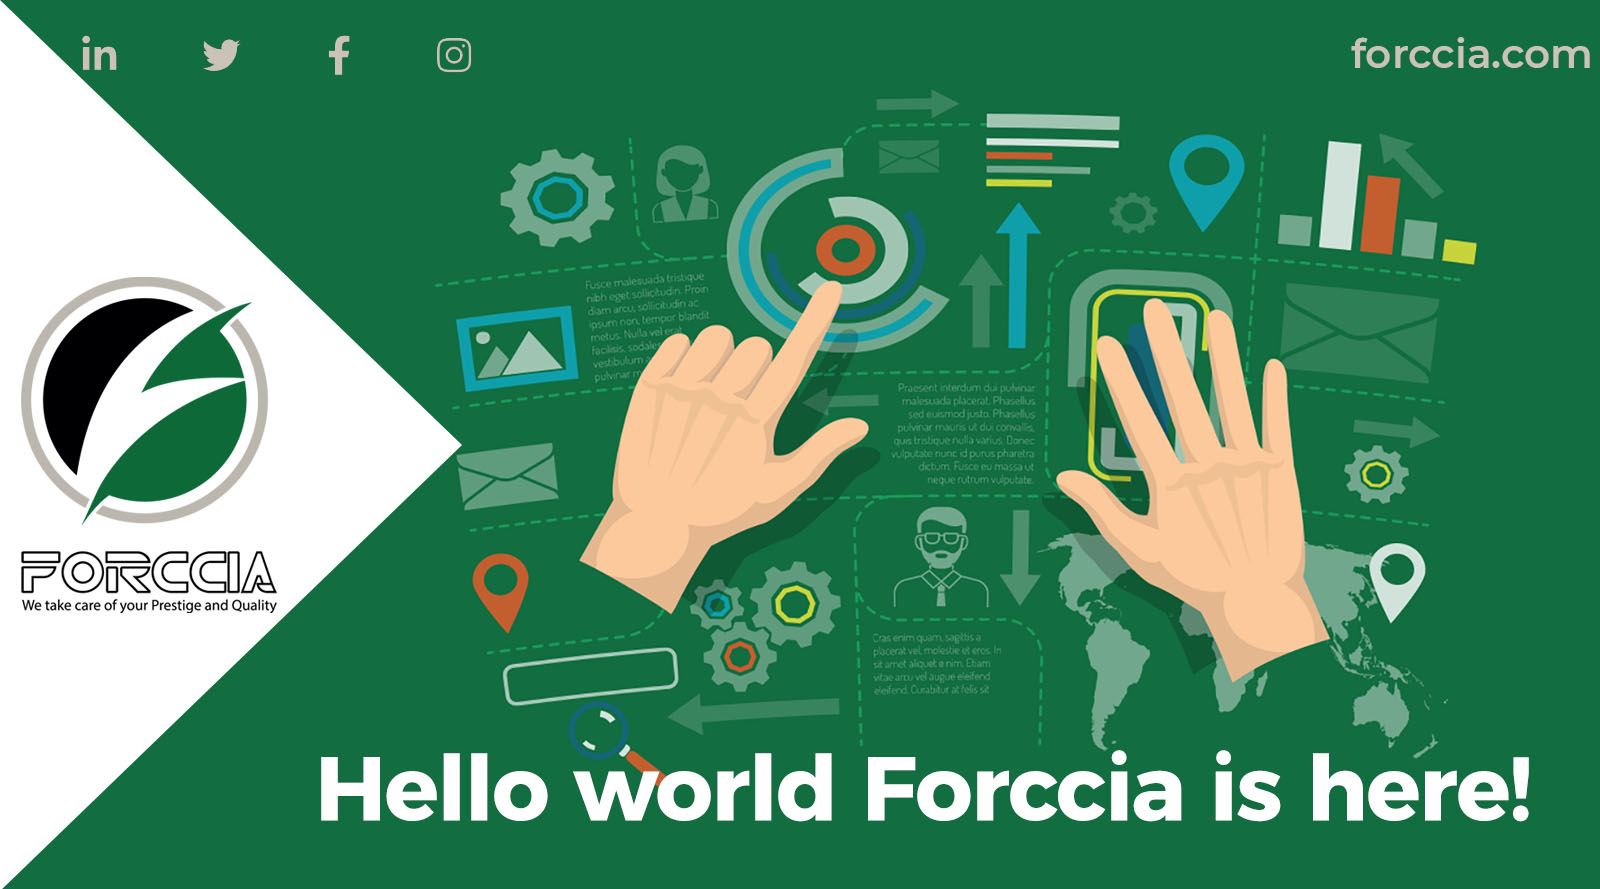 Hello world, Forccia is here